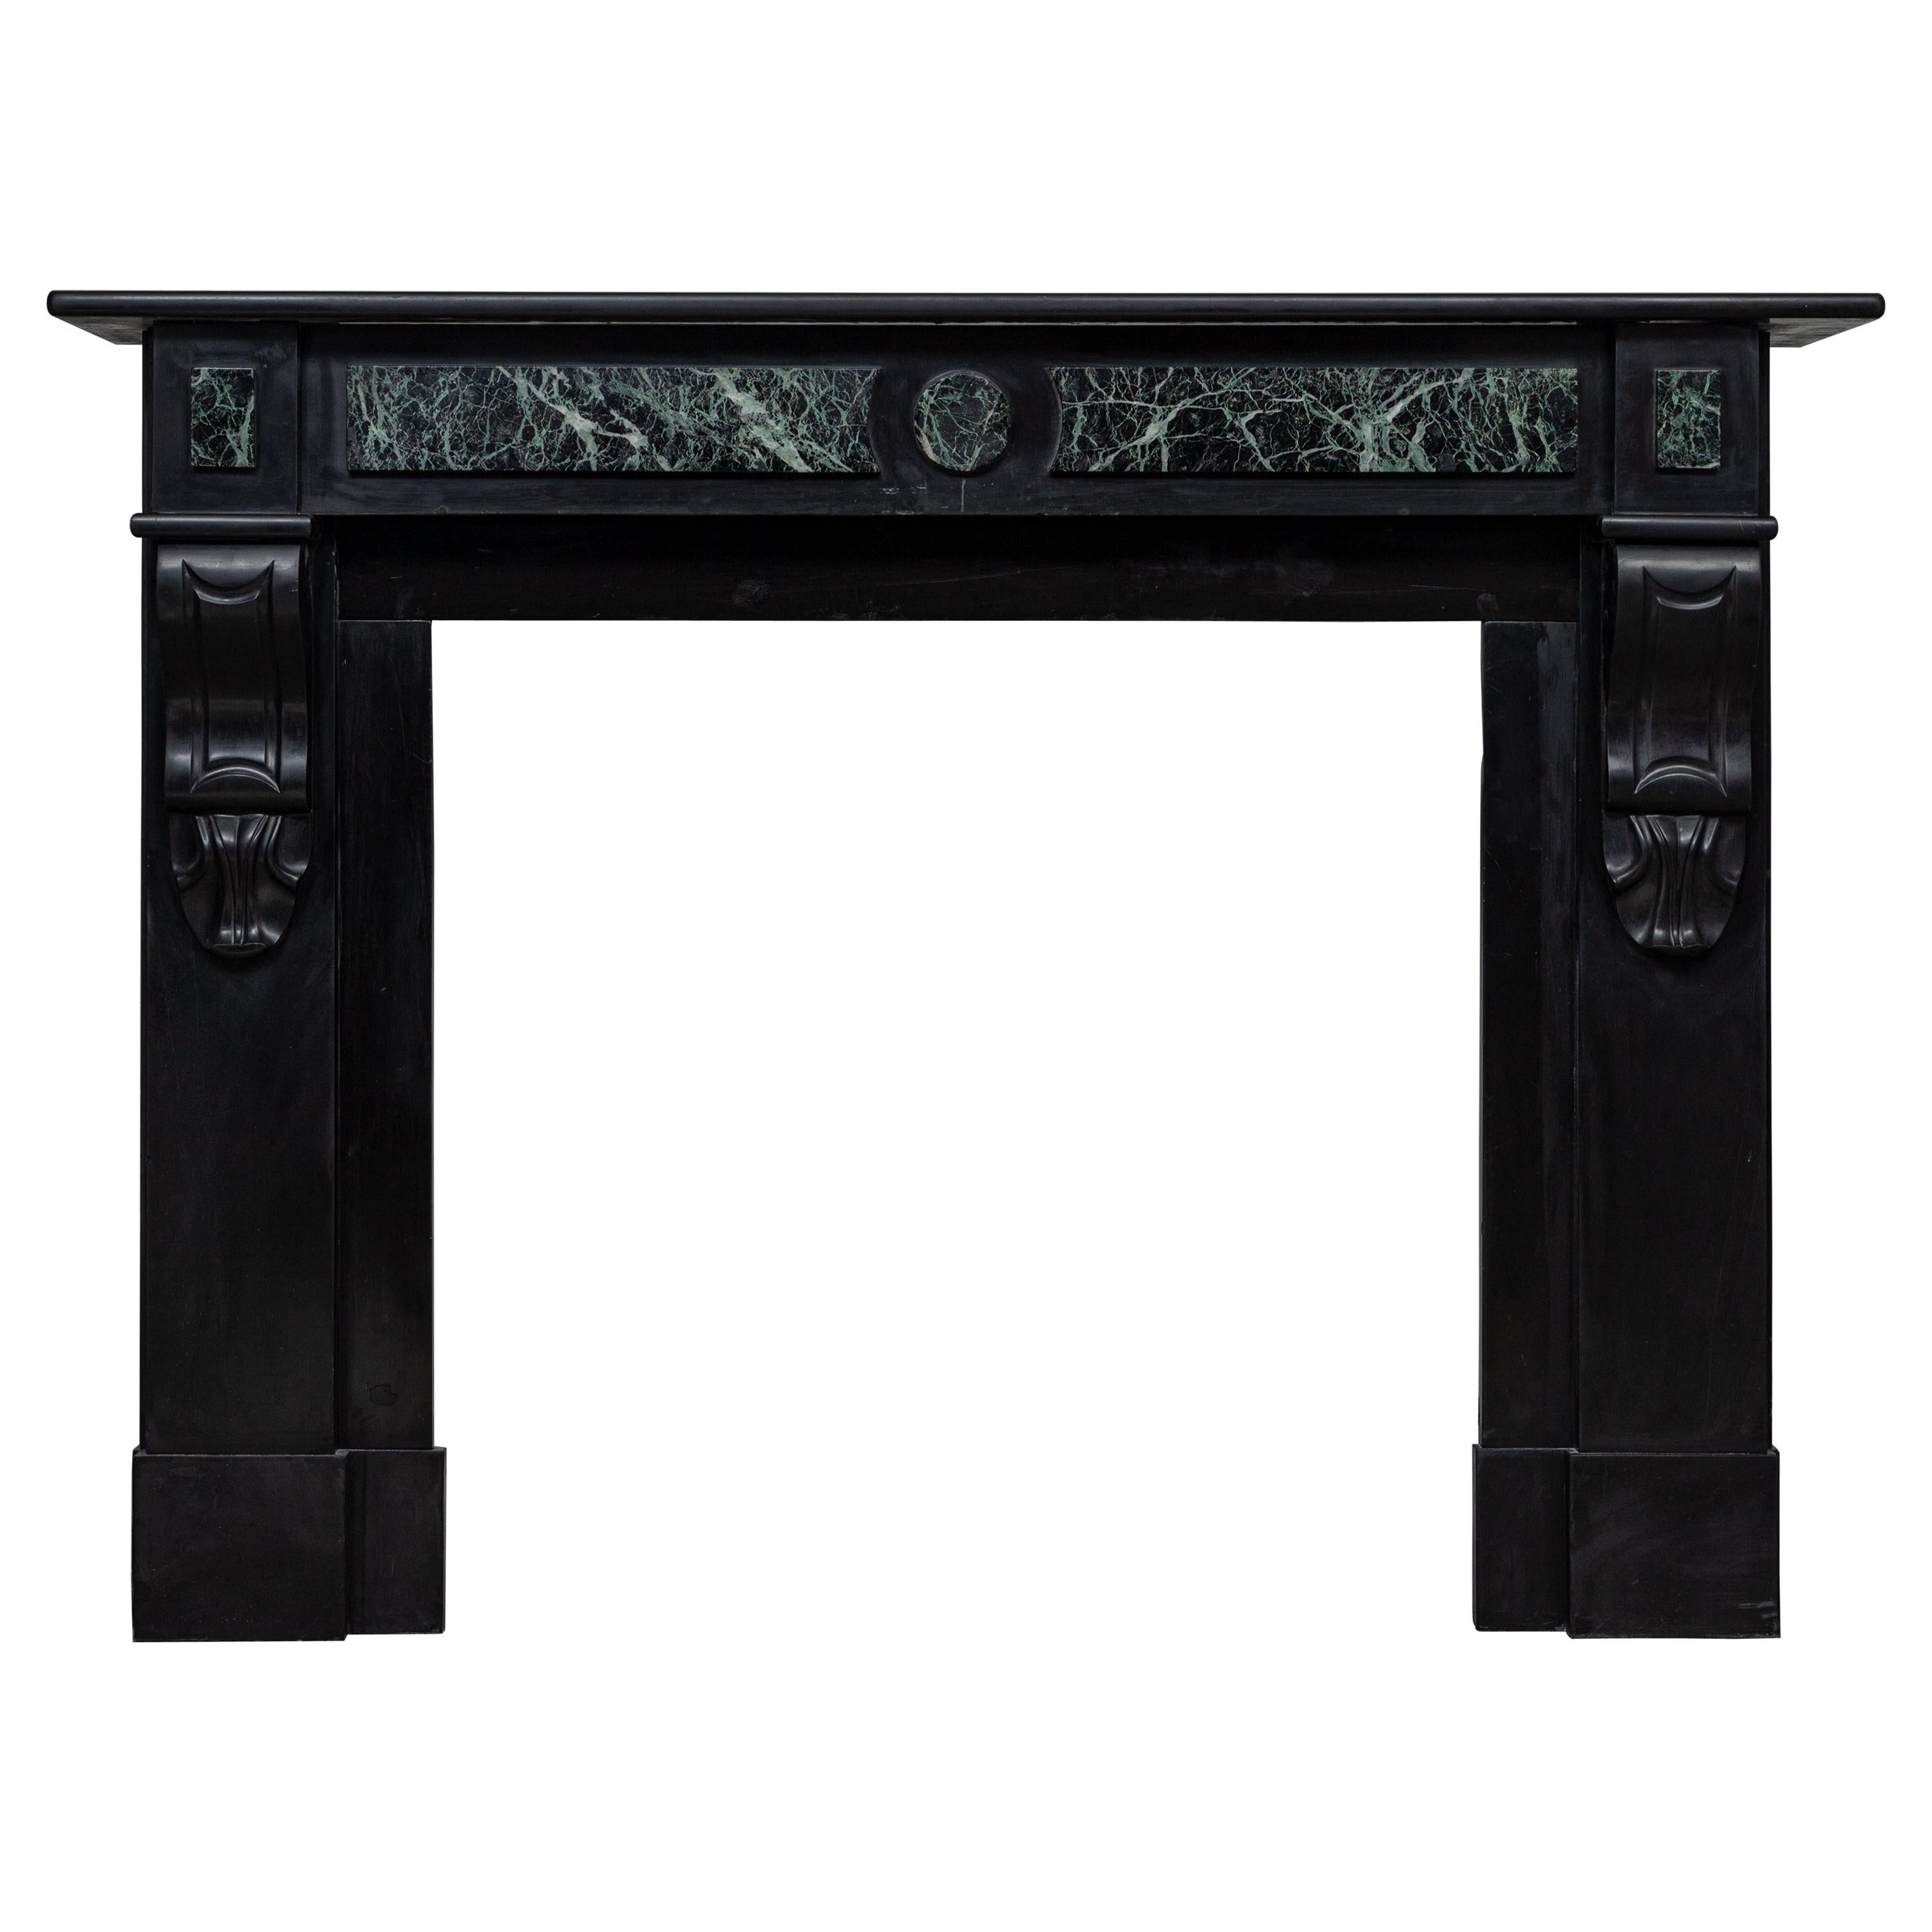 Neoclassic Noir the Mazy Black Marble Antique Fireplace Circulation Fireplace